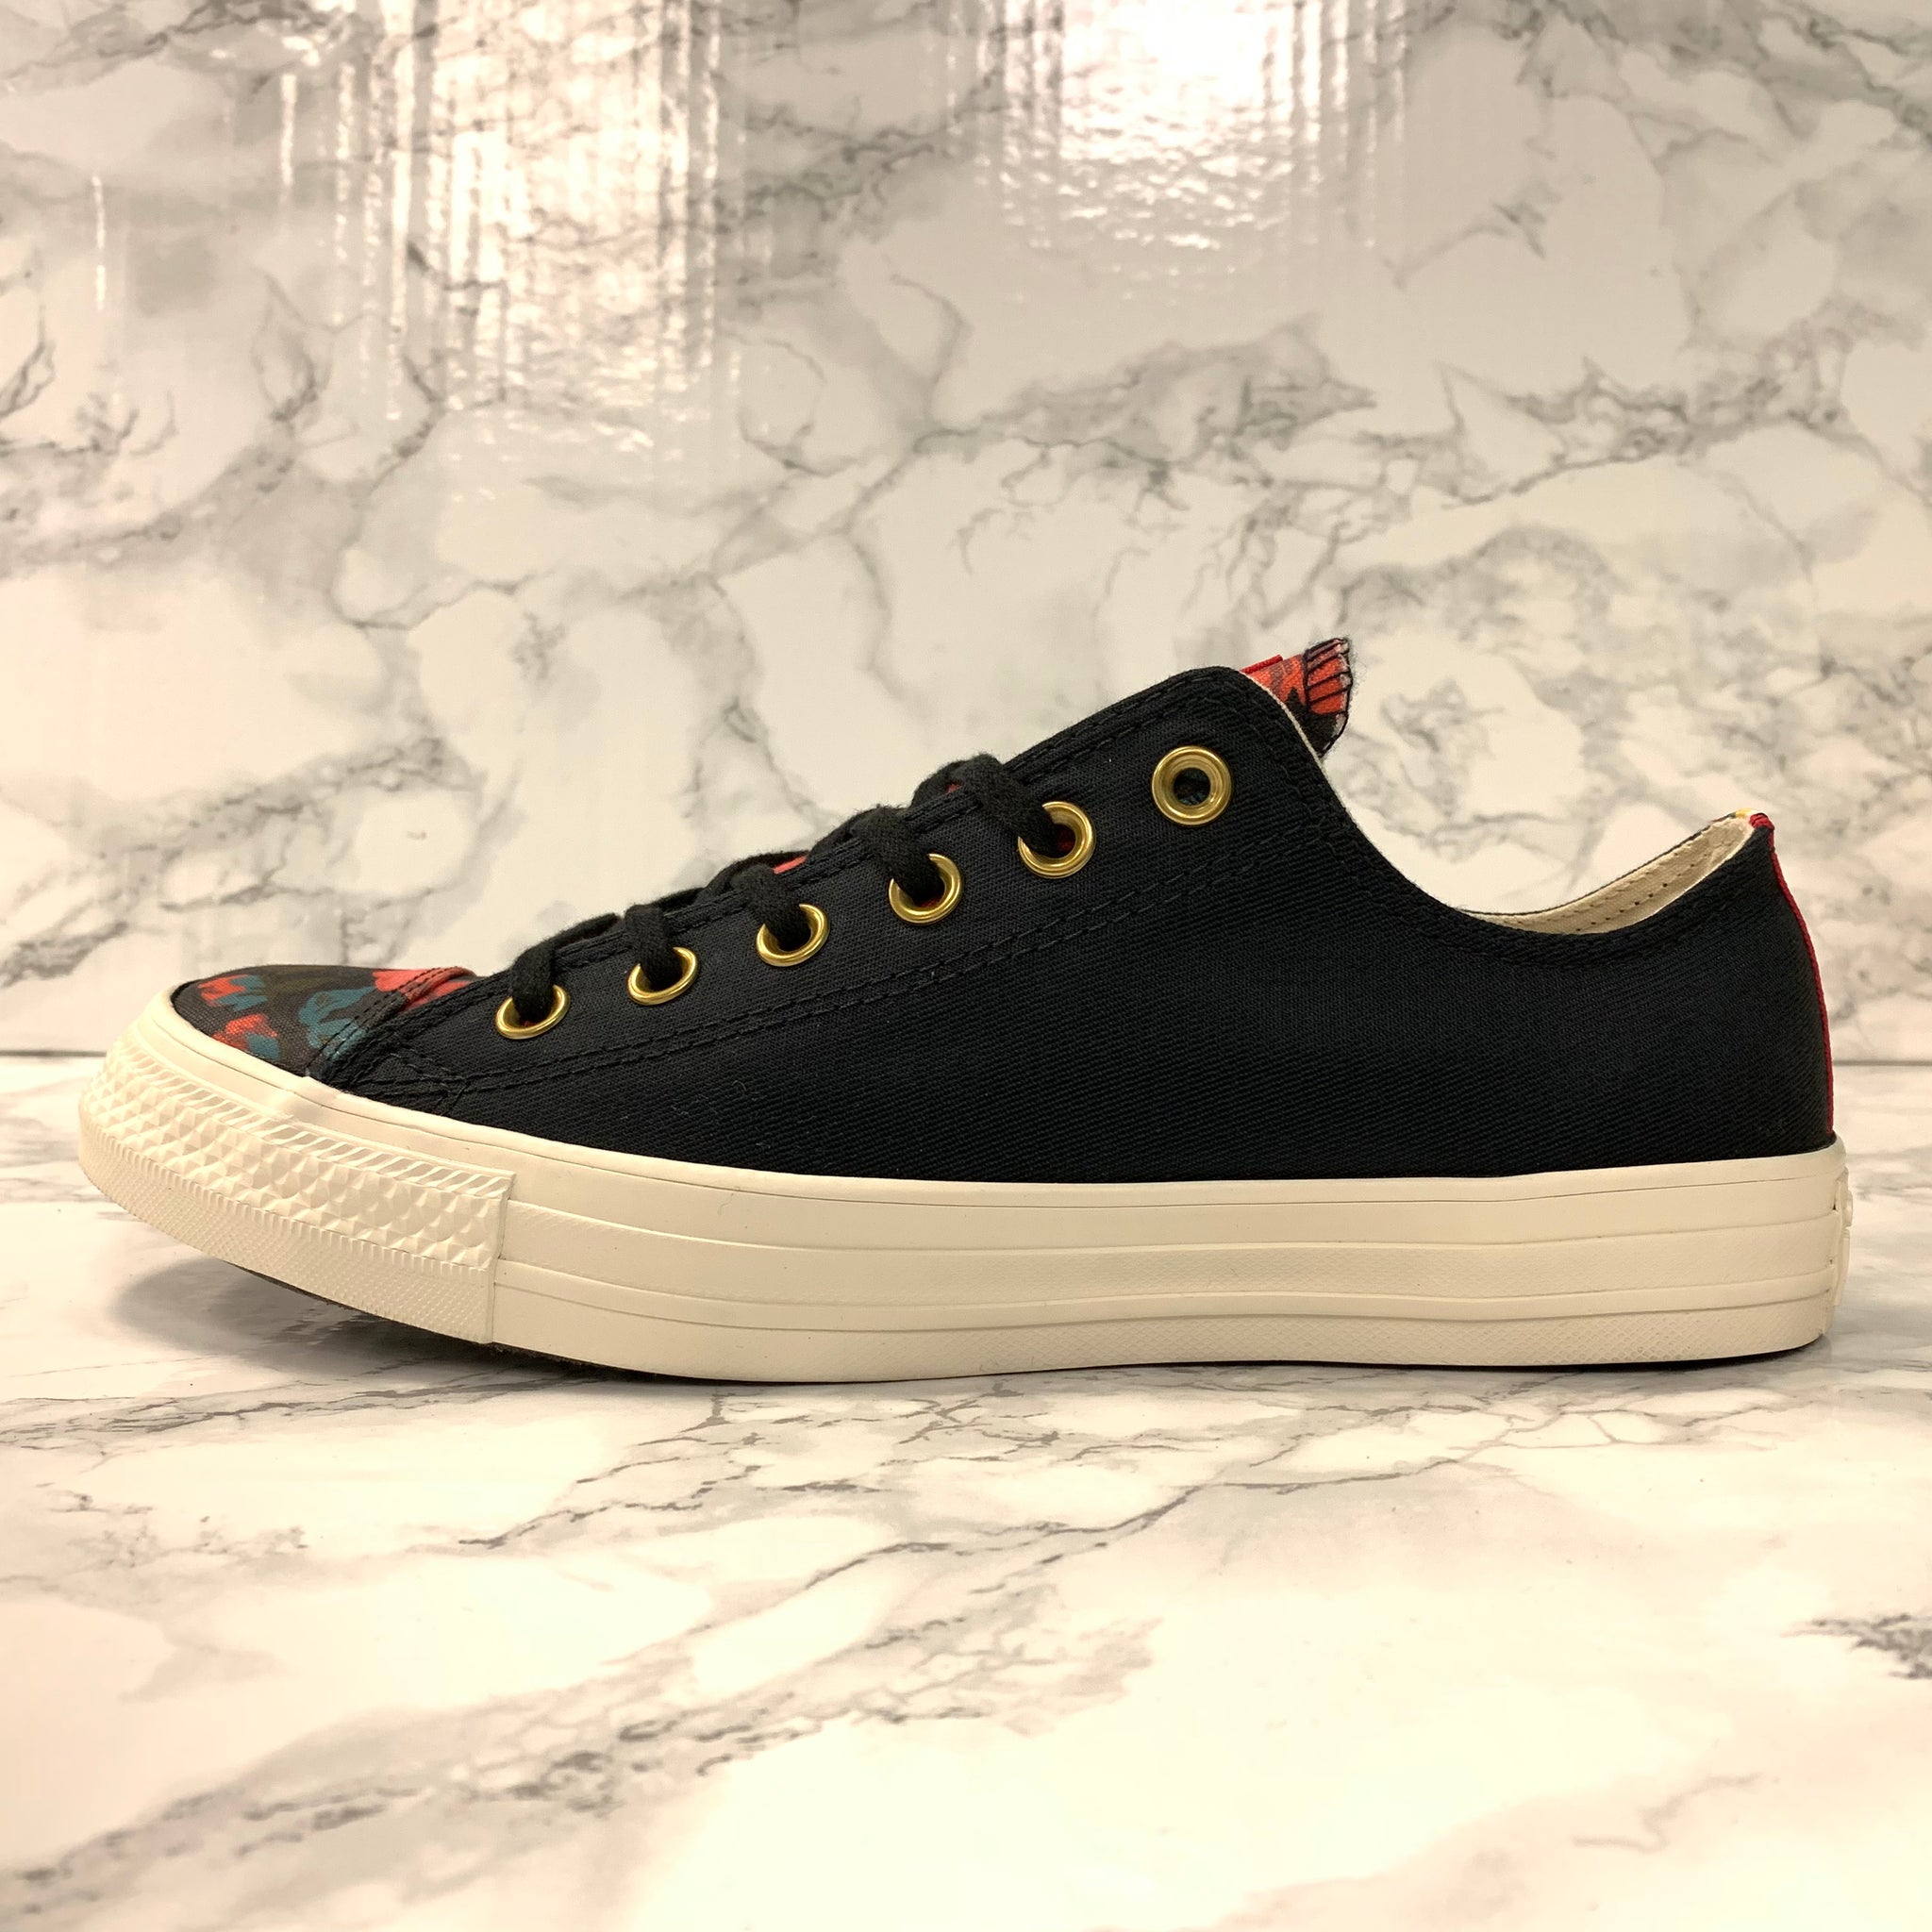 CONVERSE CHUCK TAYLOR ALL STAR PARKWAY 